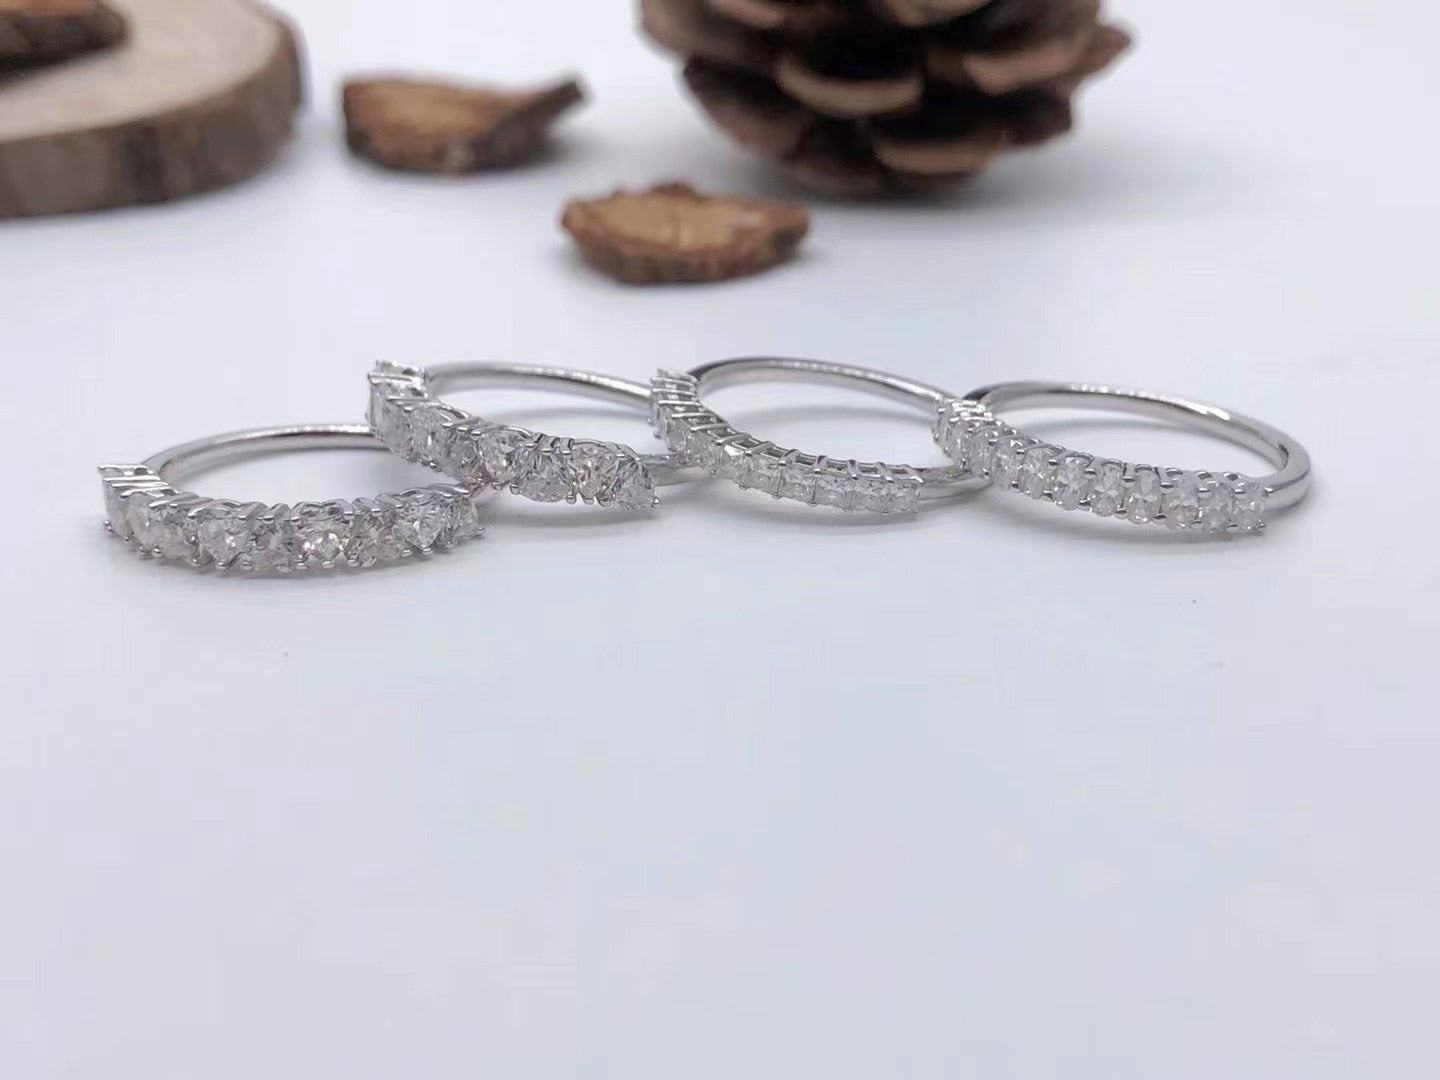 4 Silver wedding rings set with several small princess, heart, tear drop and oval cut moissanites.